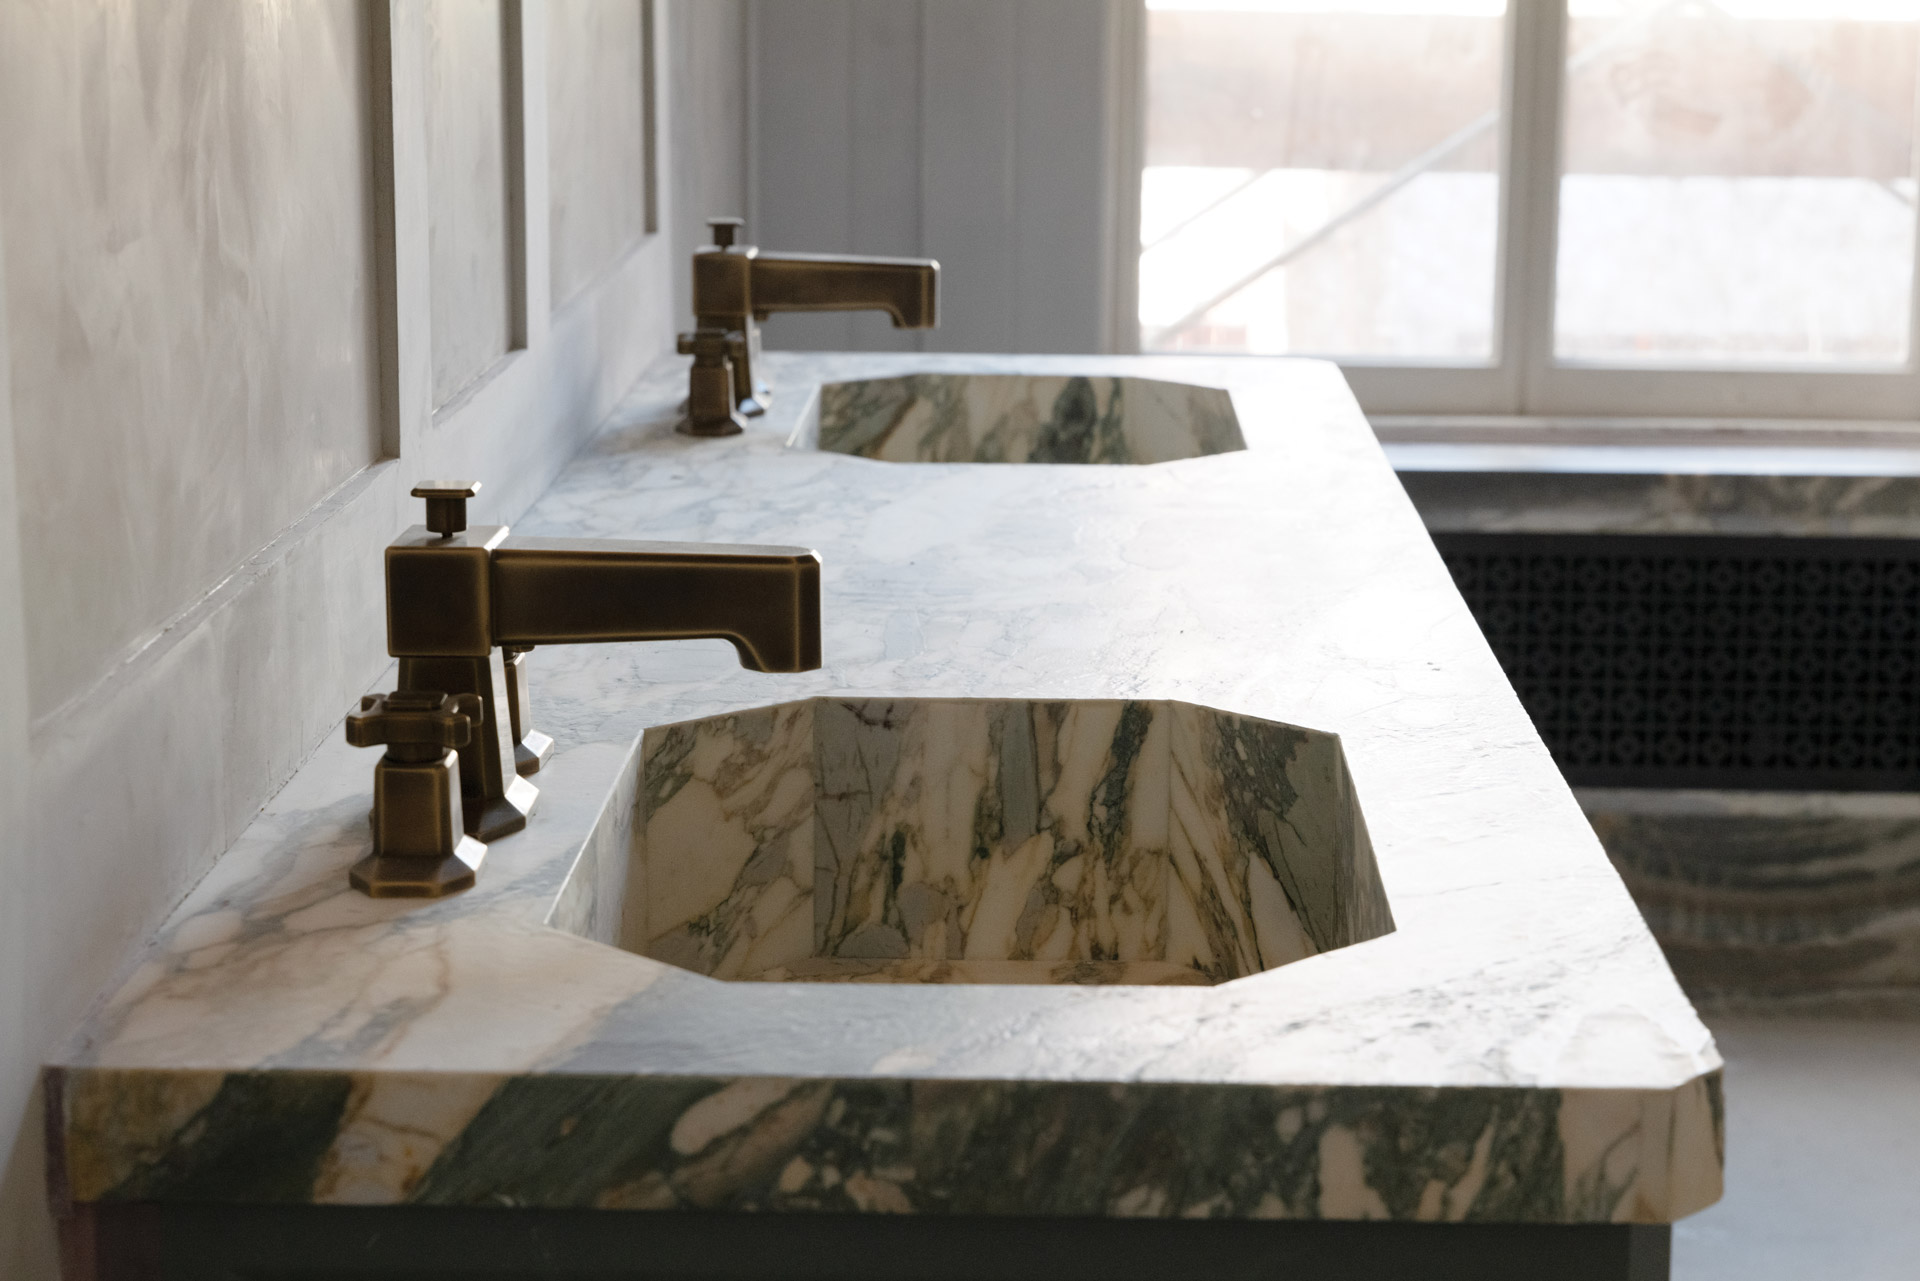 Twin octagonal sinks in the main bathroom that appear carved from a solid block were masterfully pieced together.